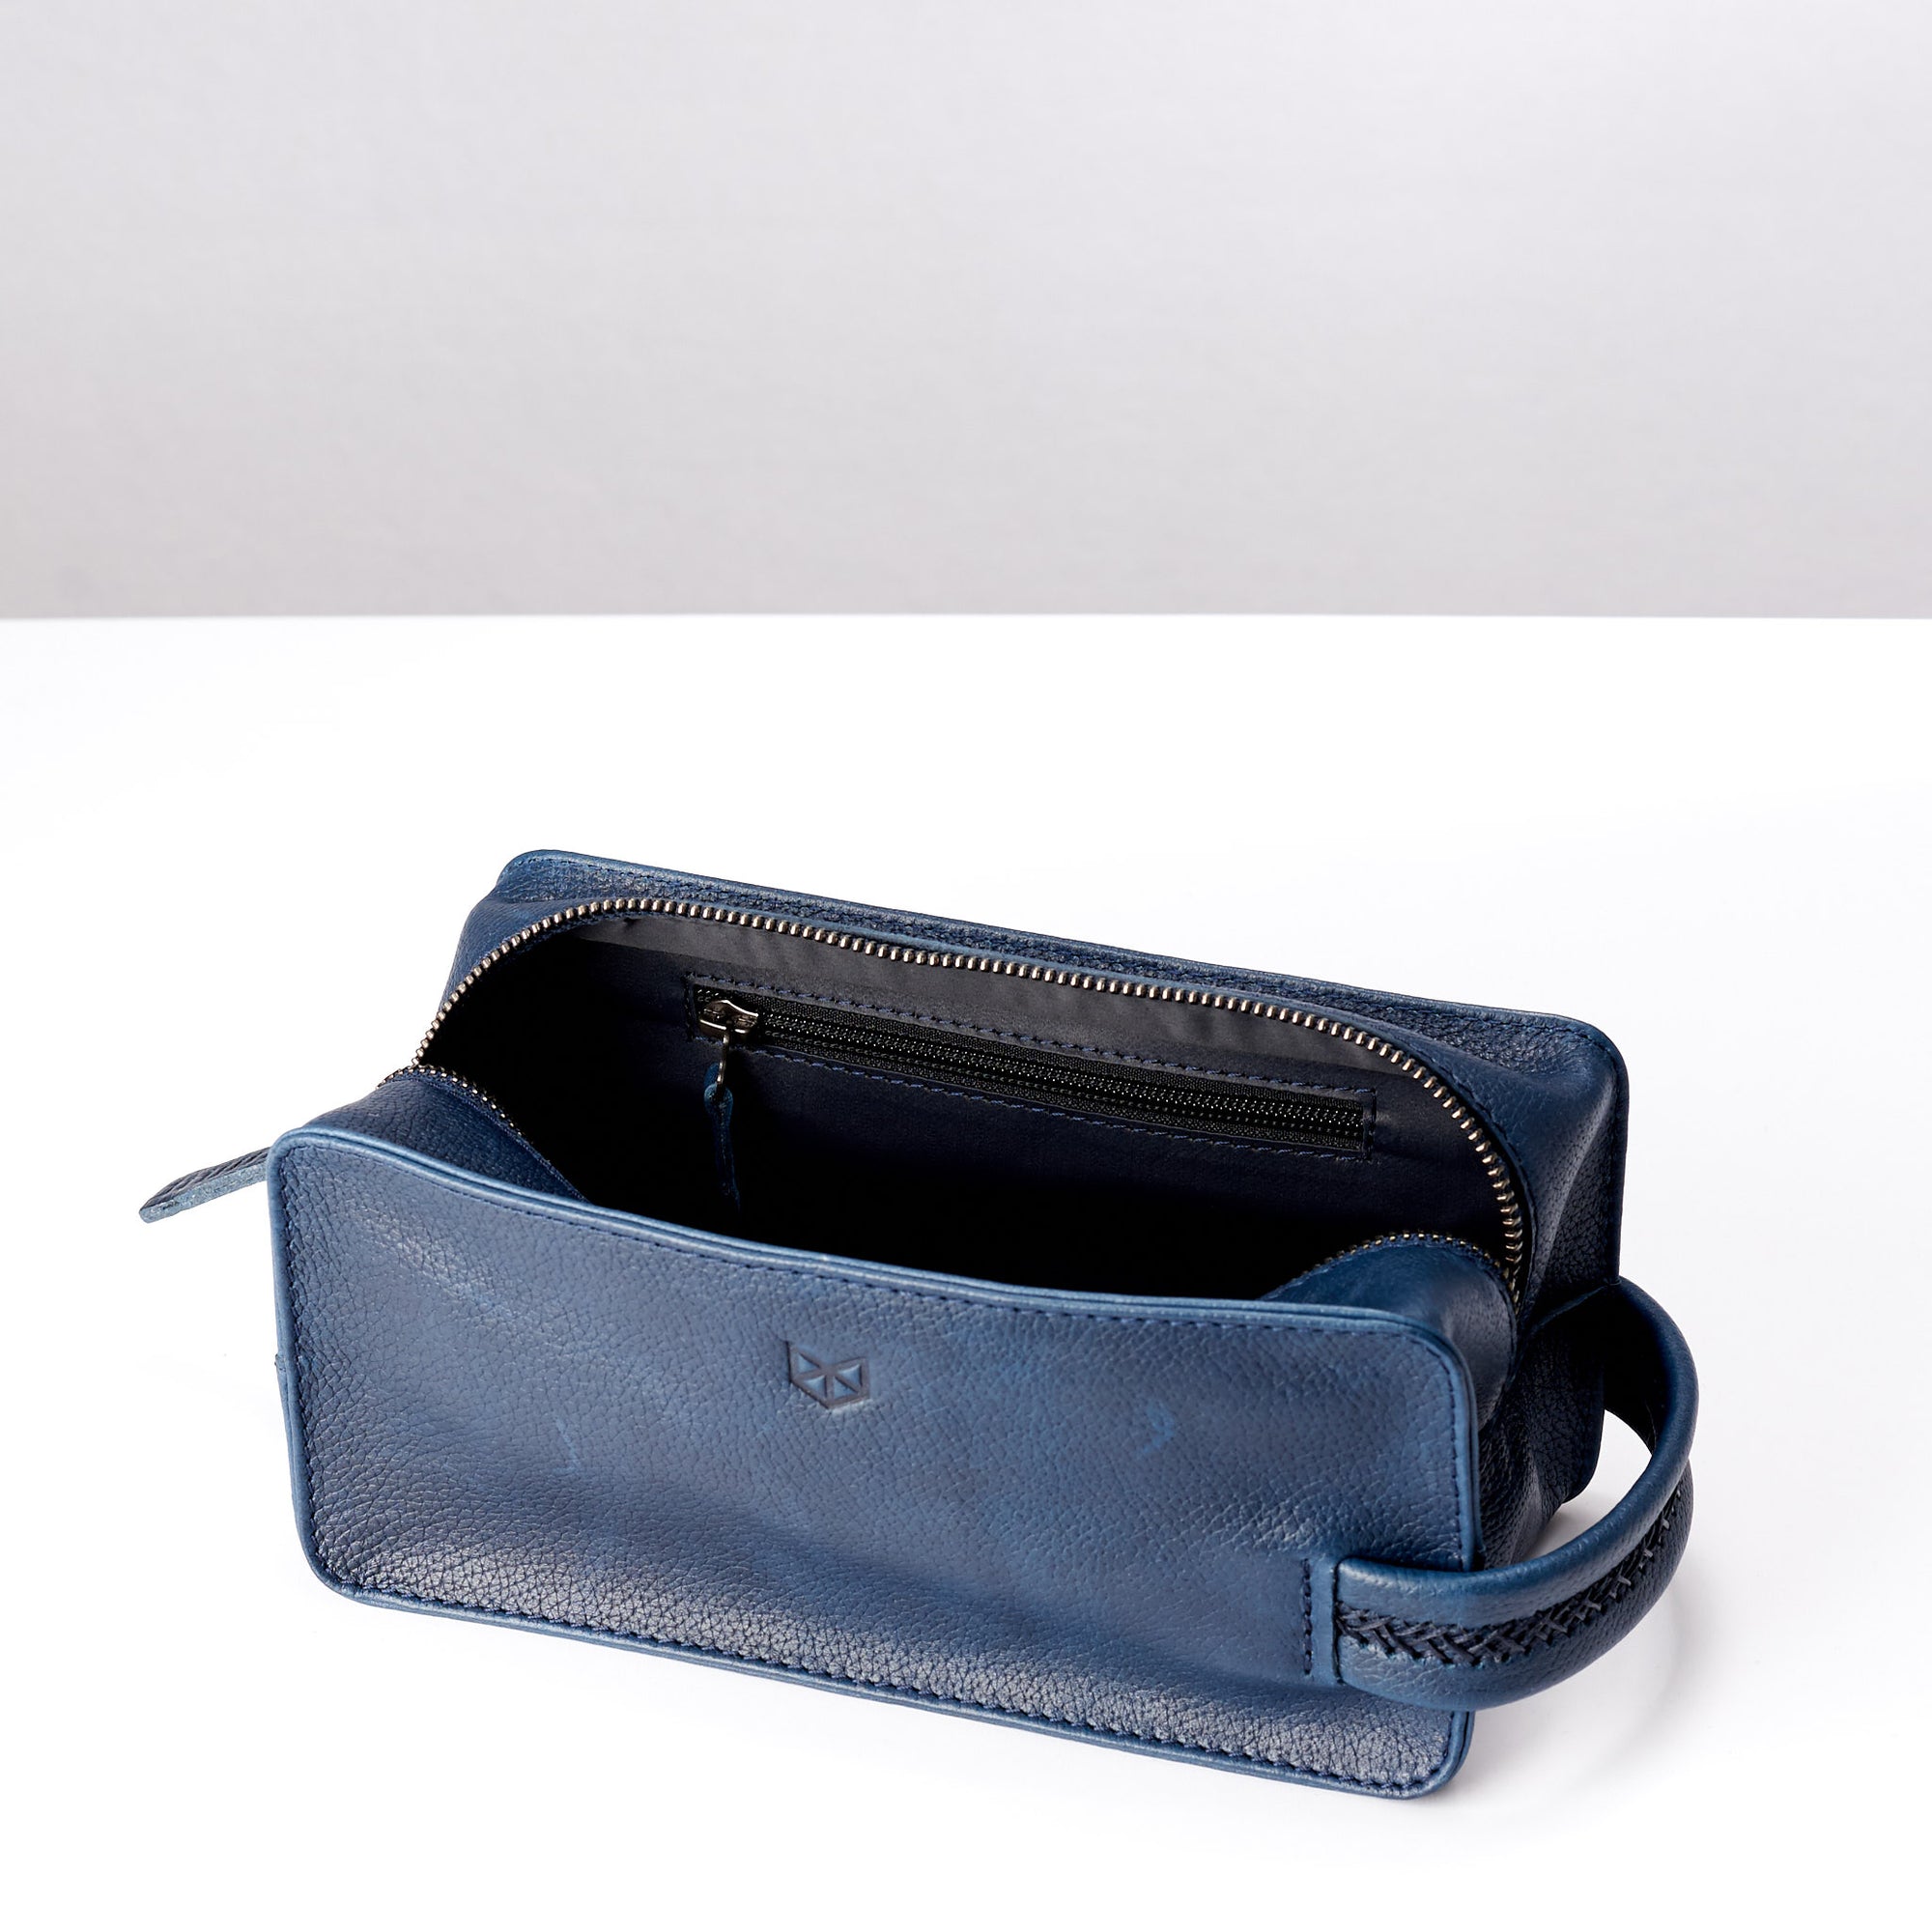 Pocket. Ocean blue leather toiletry, shaving bag with hand stitched handle. Groomsmen gifts. Leather good crafted by Capra Leather 